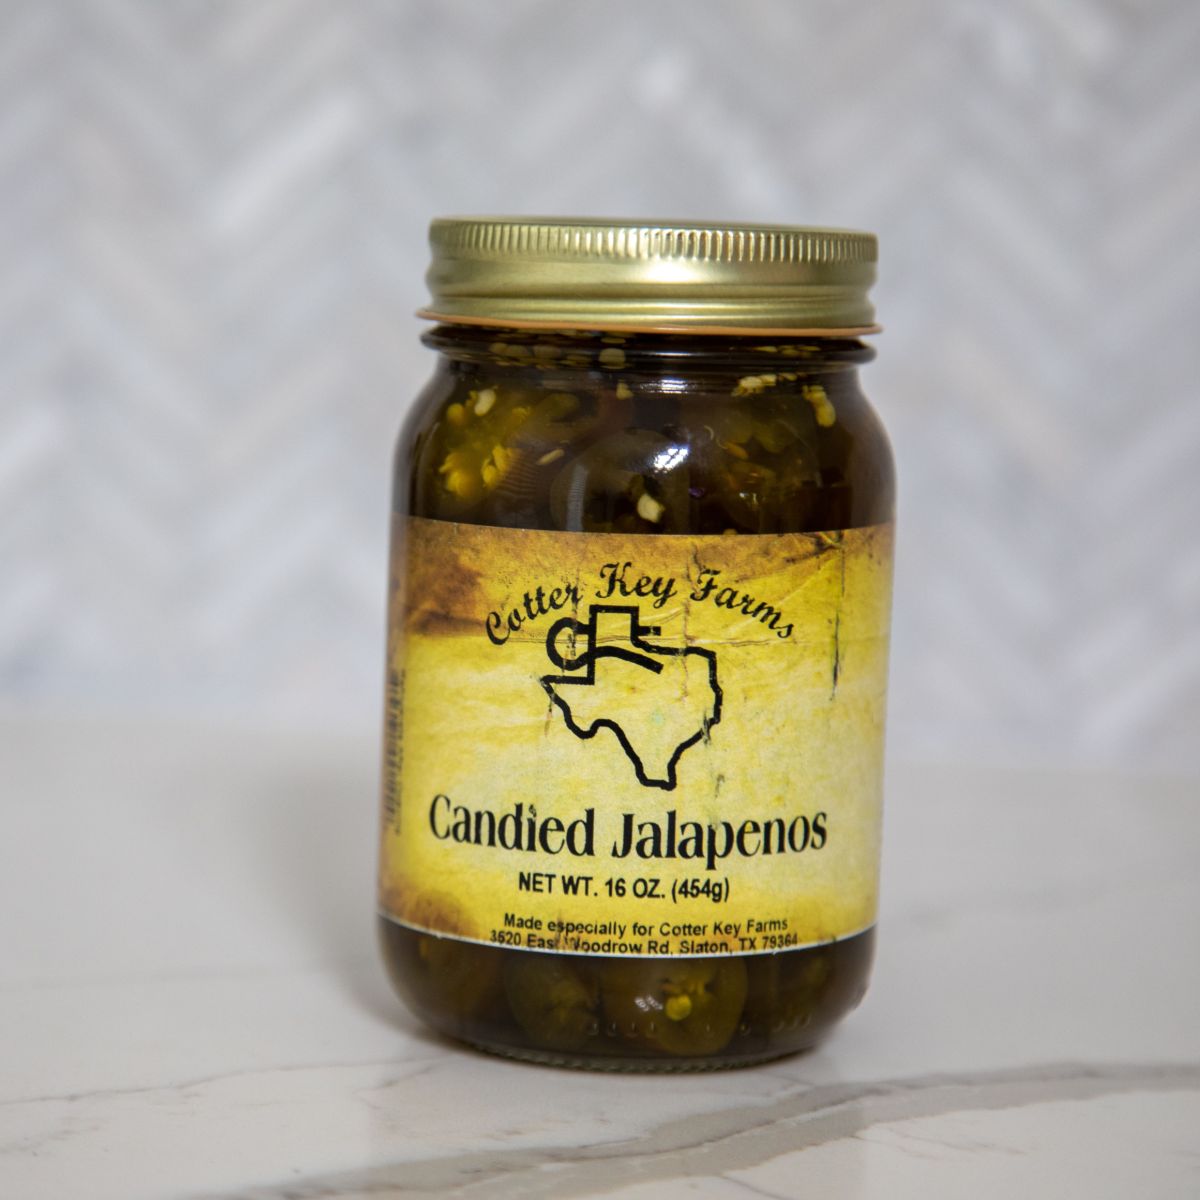 Cotter Key Farms, Lubbock, Texas, Out West Mercantile, Pecan Ridge, Slaton, Texas, Bakery, Gift Shop, Salsas, Sauces, Jams, Gift Items, Near Lubbock, candied jalepenos